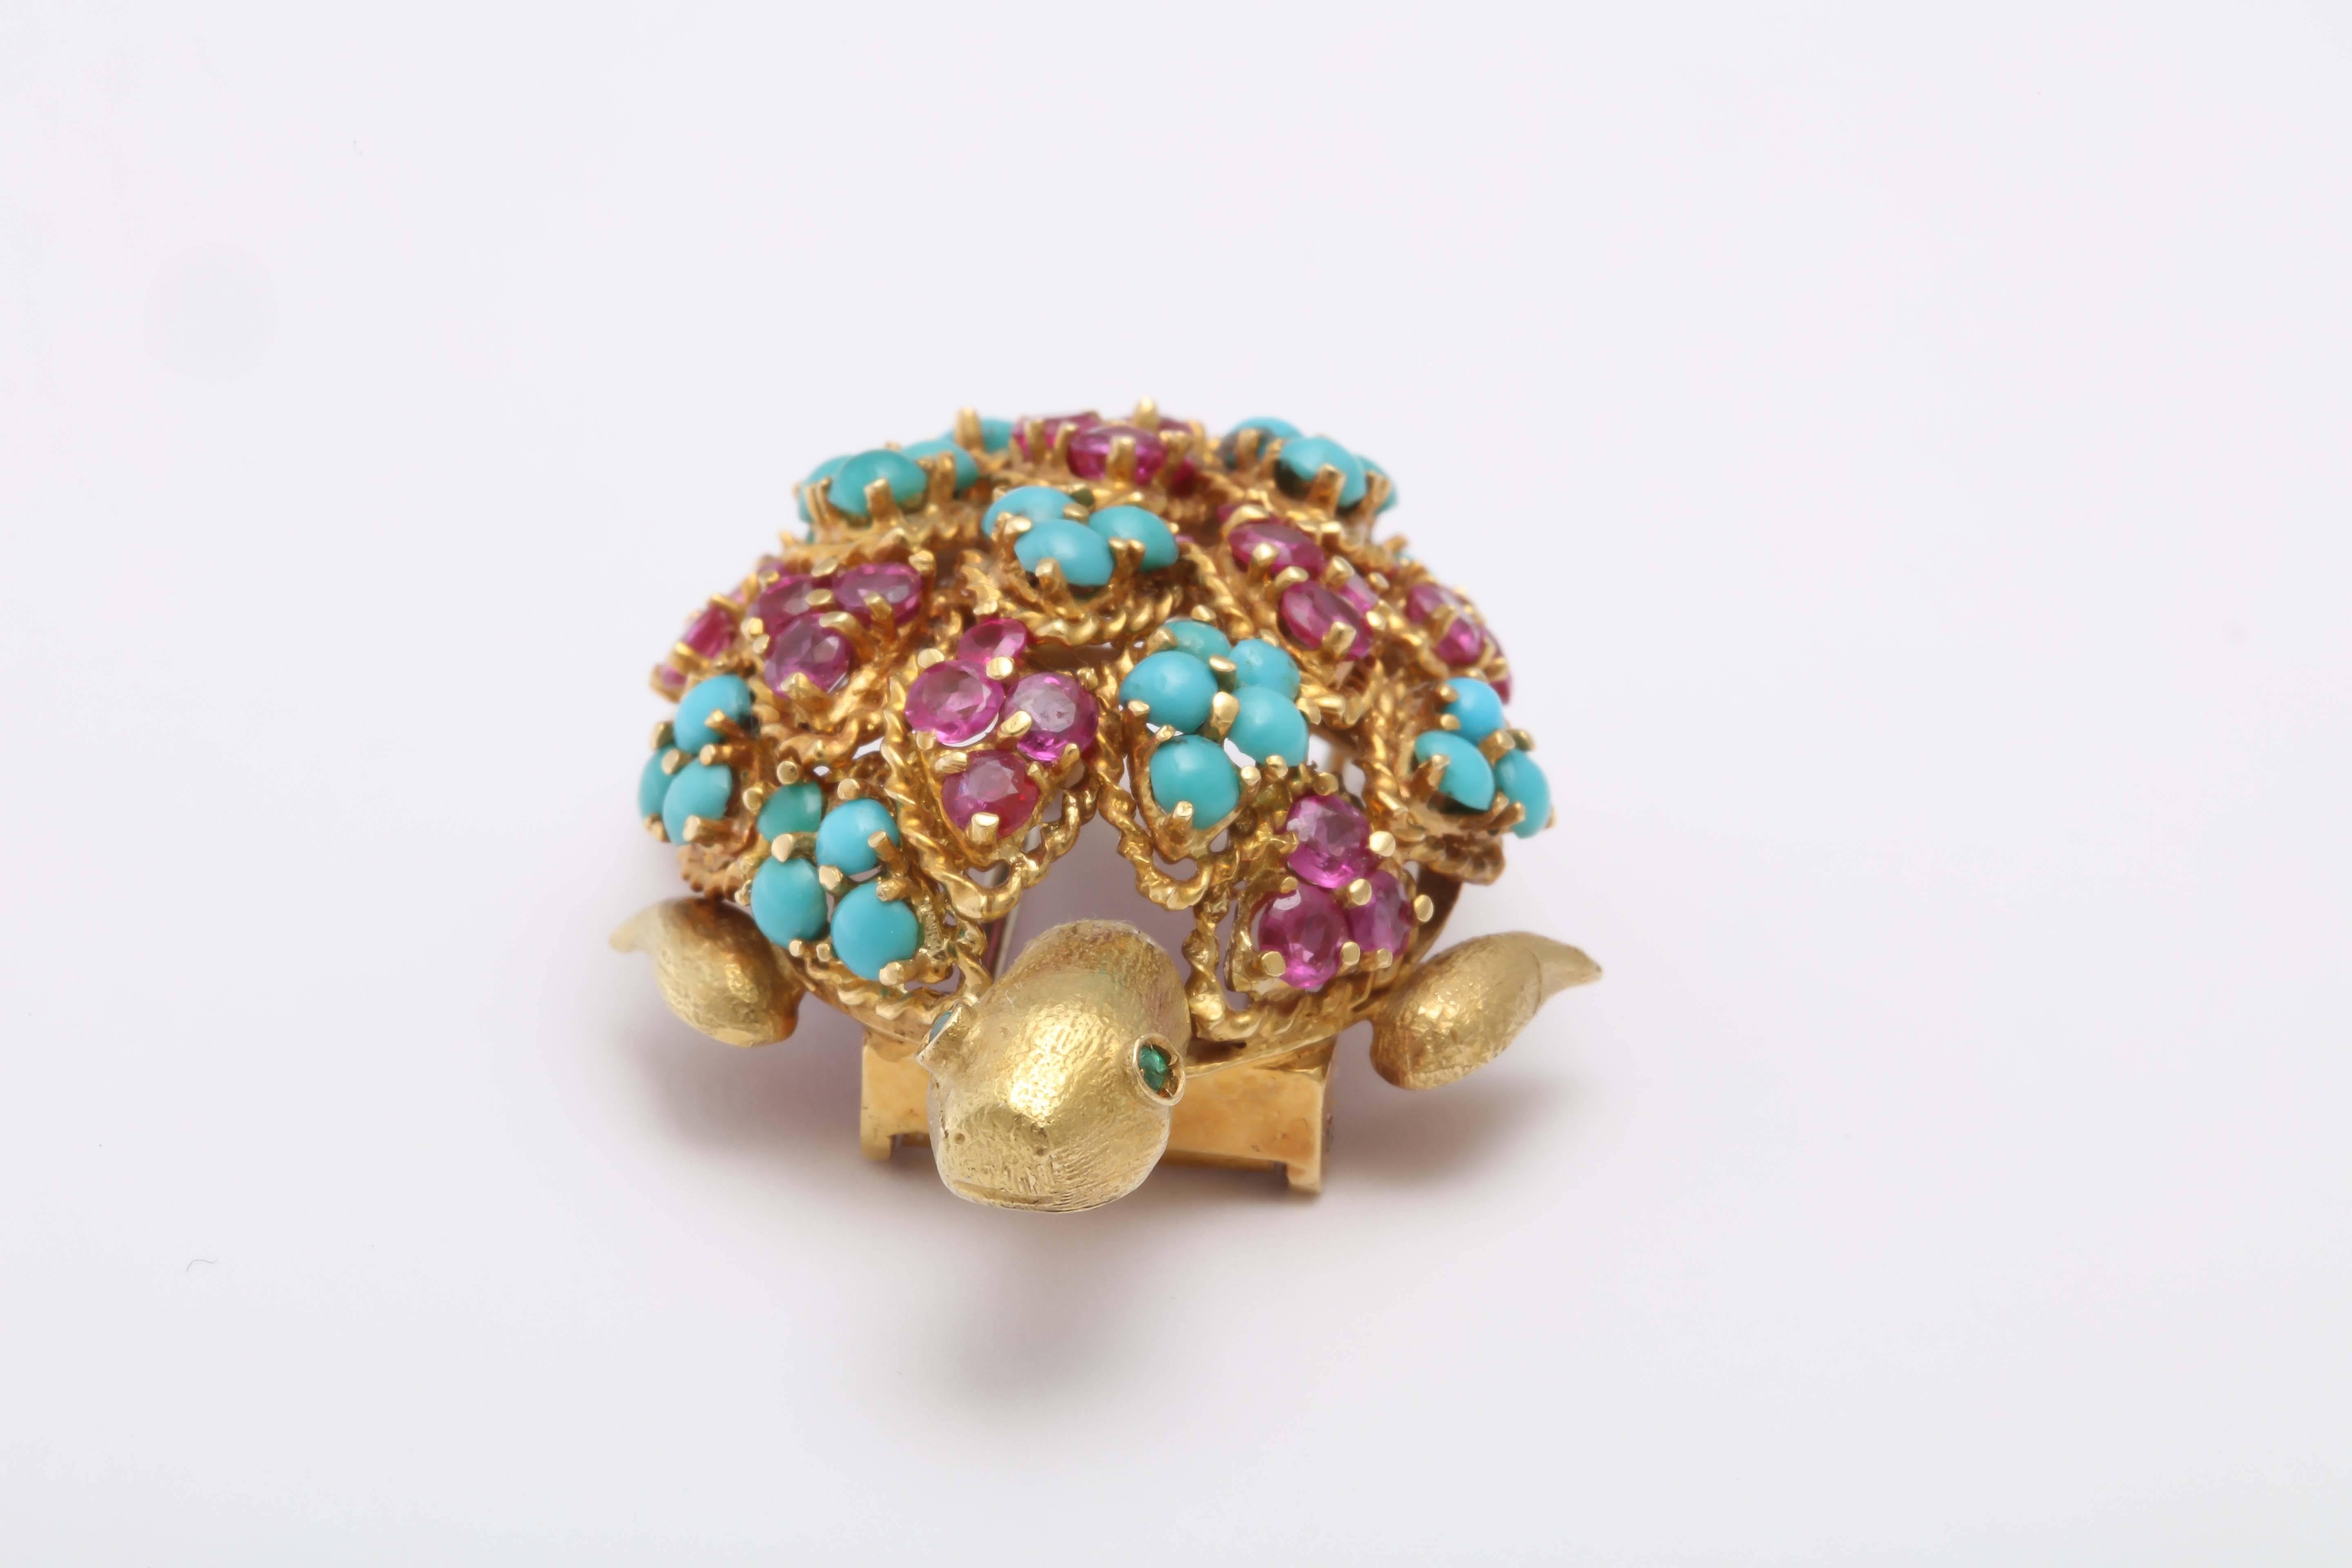 Contemporary Whimsical Jewel Backed Turtle Brooch